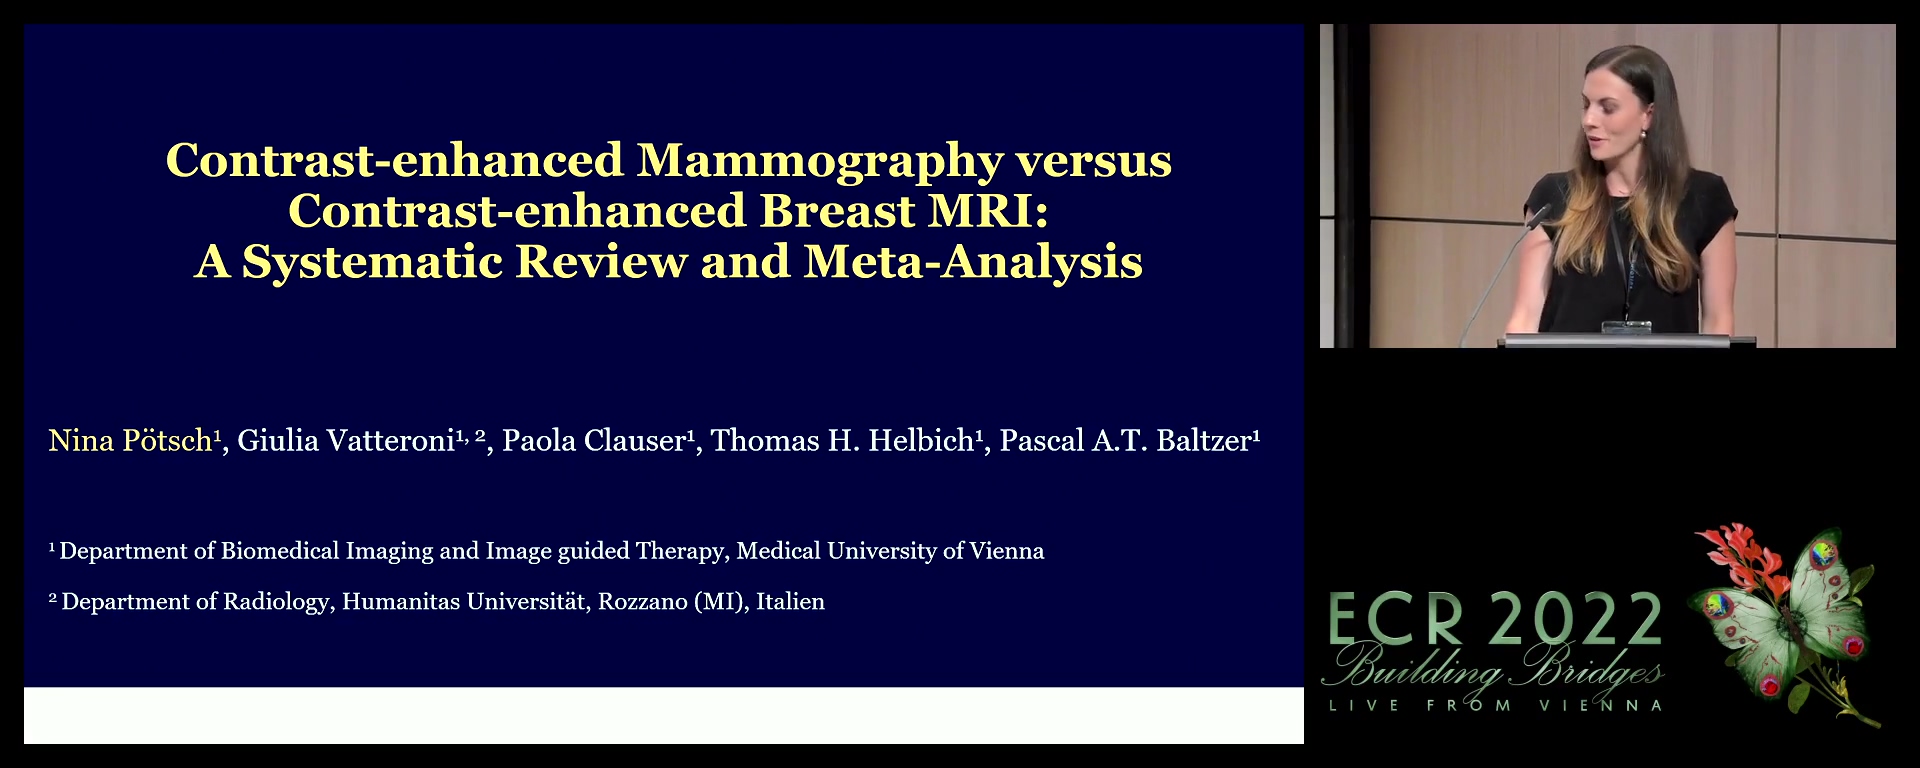 Head-to-head comparison of contrast-enhanced mammography and contrast-enhanced MRI of the breast: a meta-analysis